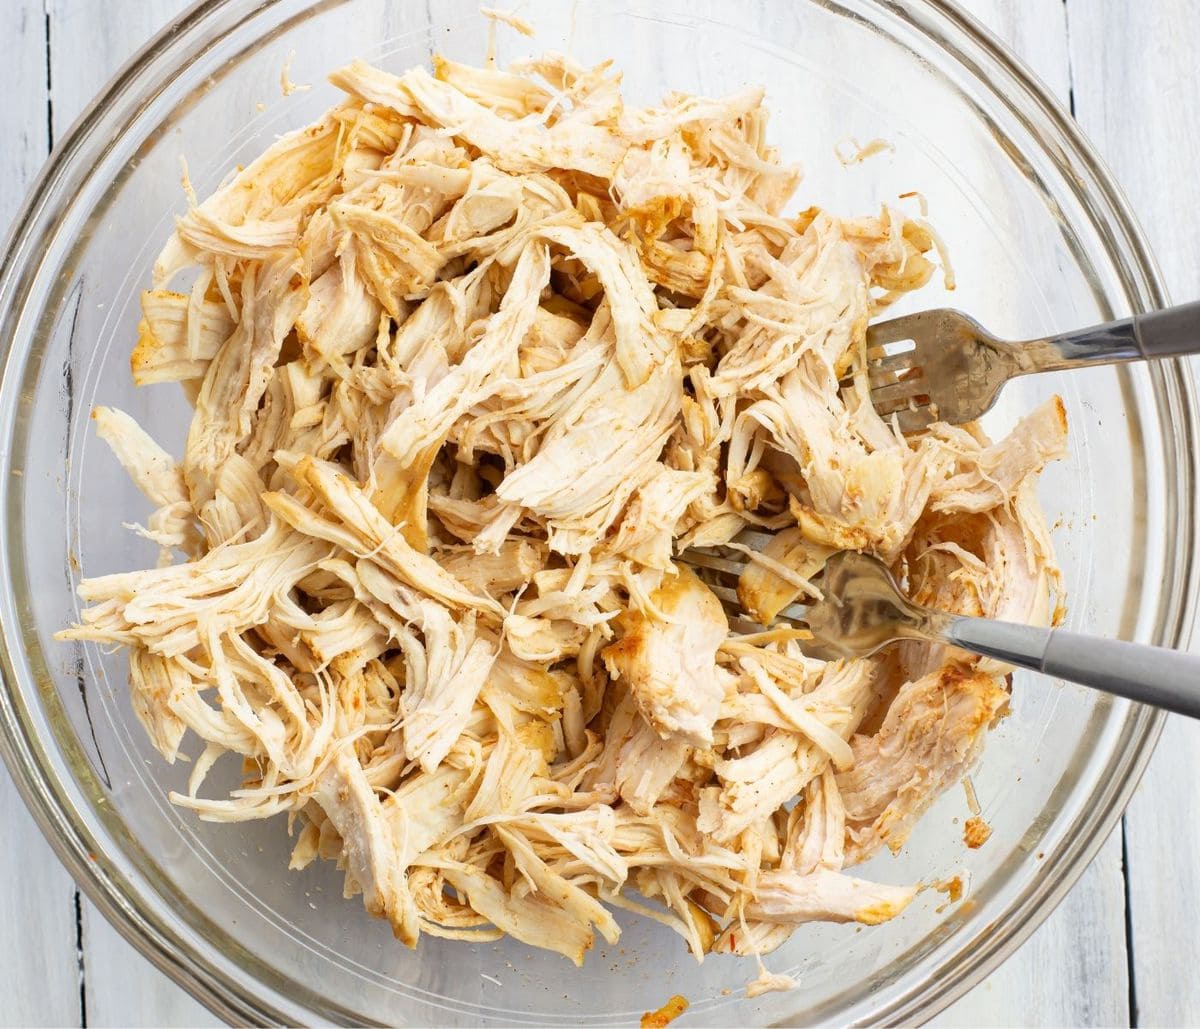 a glass bowl filled with shredded chicken.